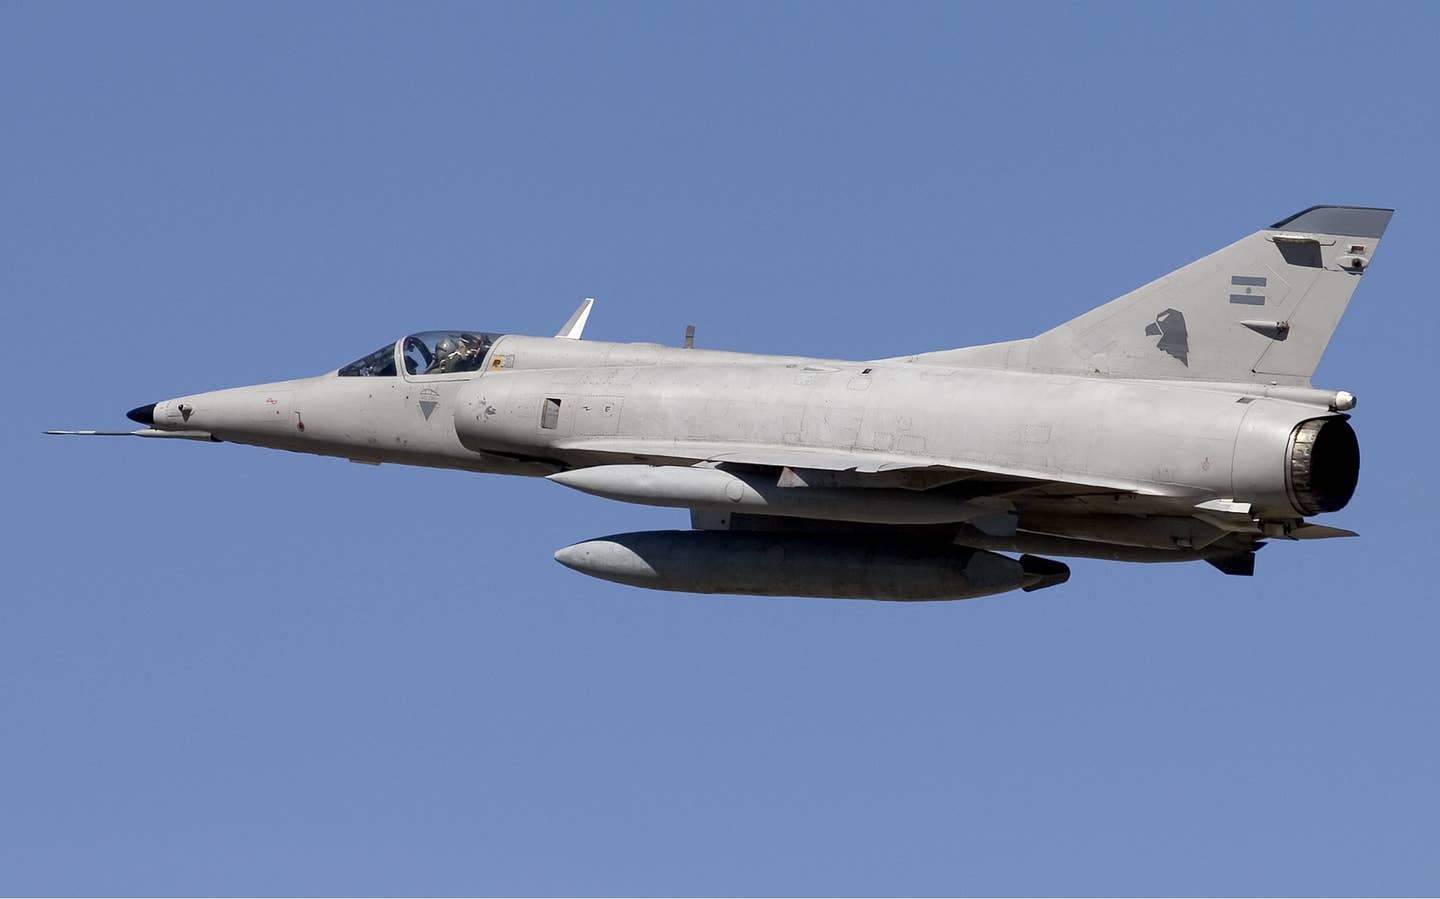 One of the last Argentine Air Force Mirages: A Mirage 5PA upgraded to Mara standard, seen in November 2005. <em>Chris Lofting</em>